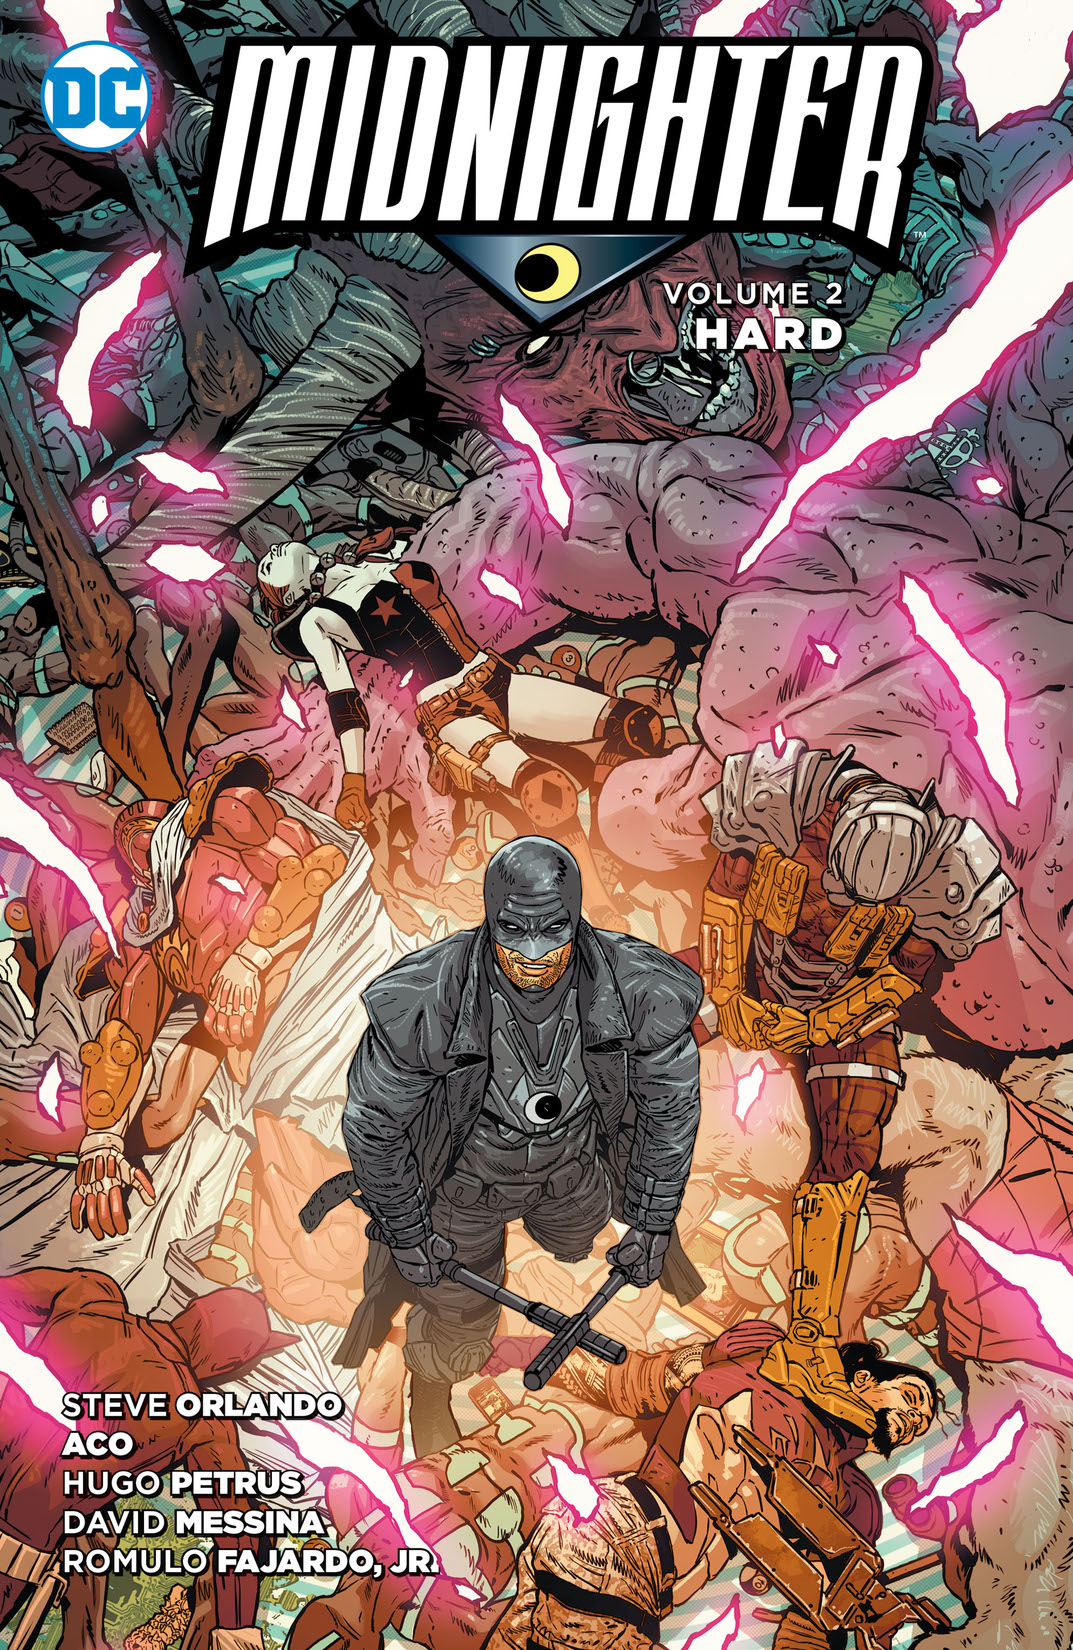 Midnighter Vol. 2: Hard preview images